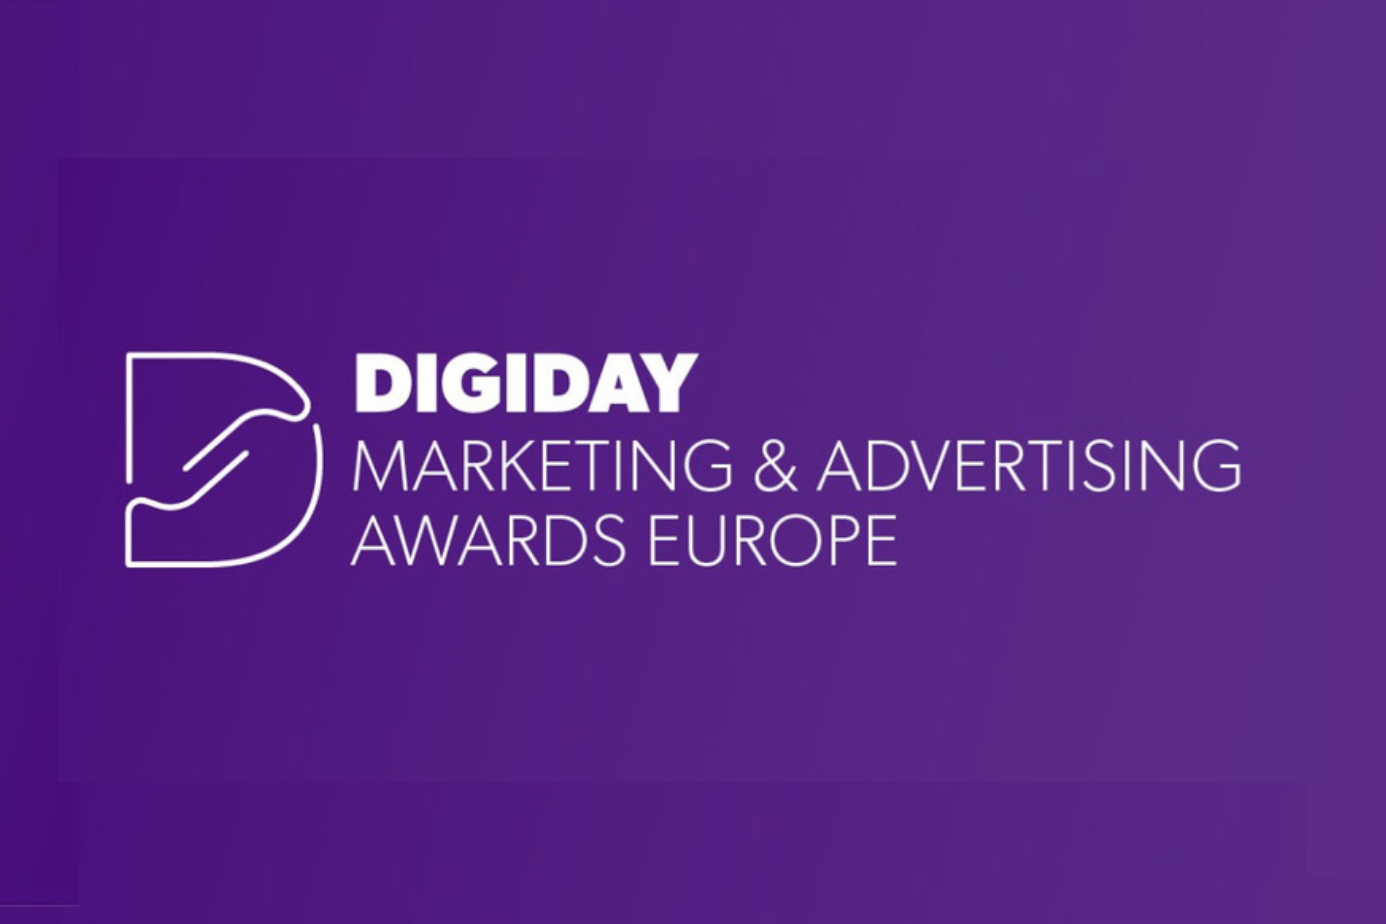 Unruly Shortlisted For Best Use Of Data At Digiday Marketing & Advertising Awards